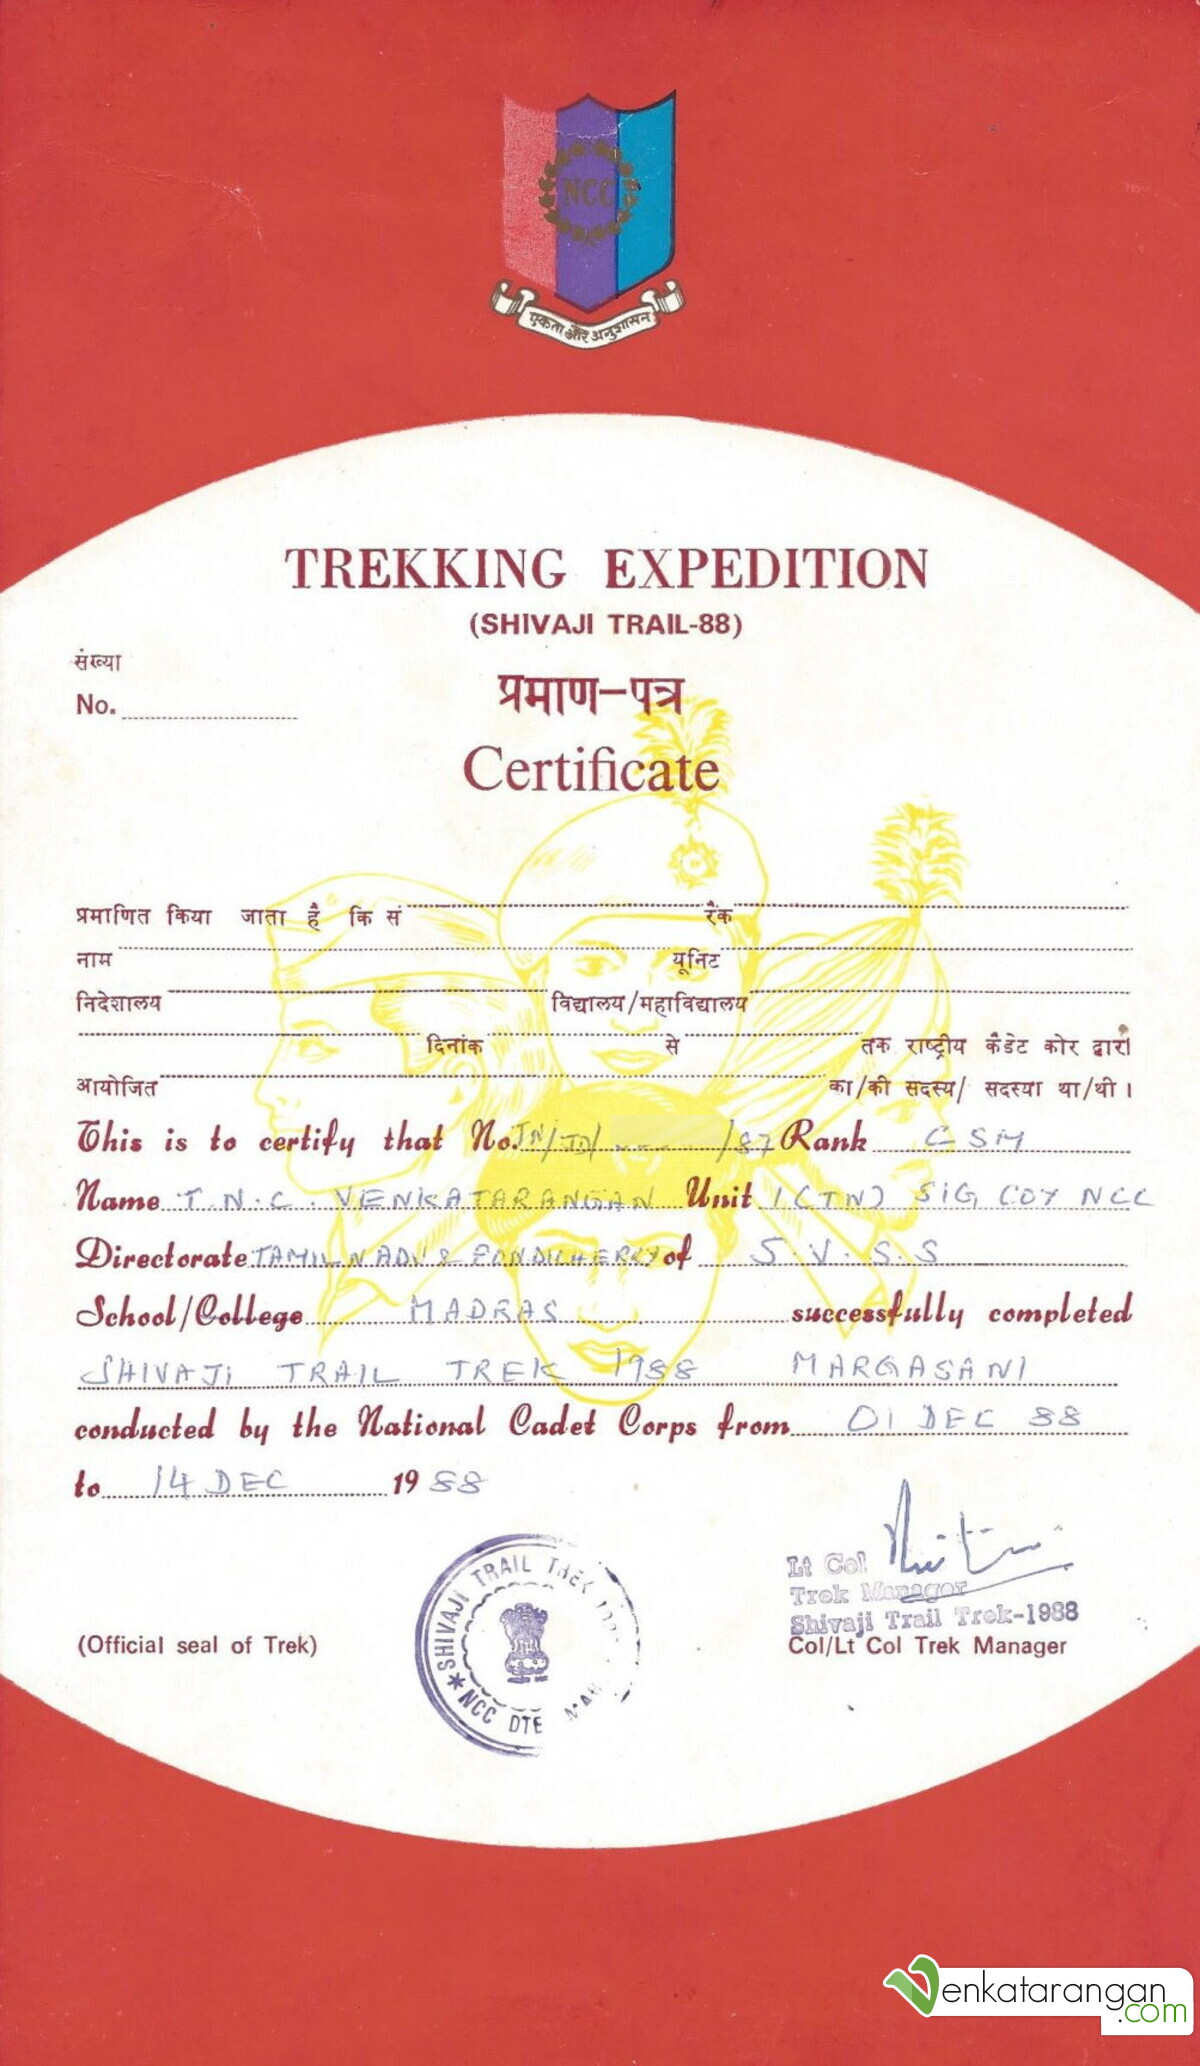 Certificate given to Venkatarangan for completing the Shivaji Trail Trek, 1988 in Margasani conducted by National Cadet Corps 